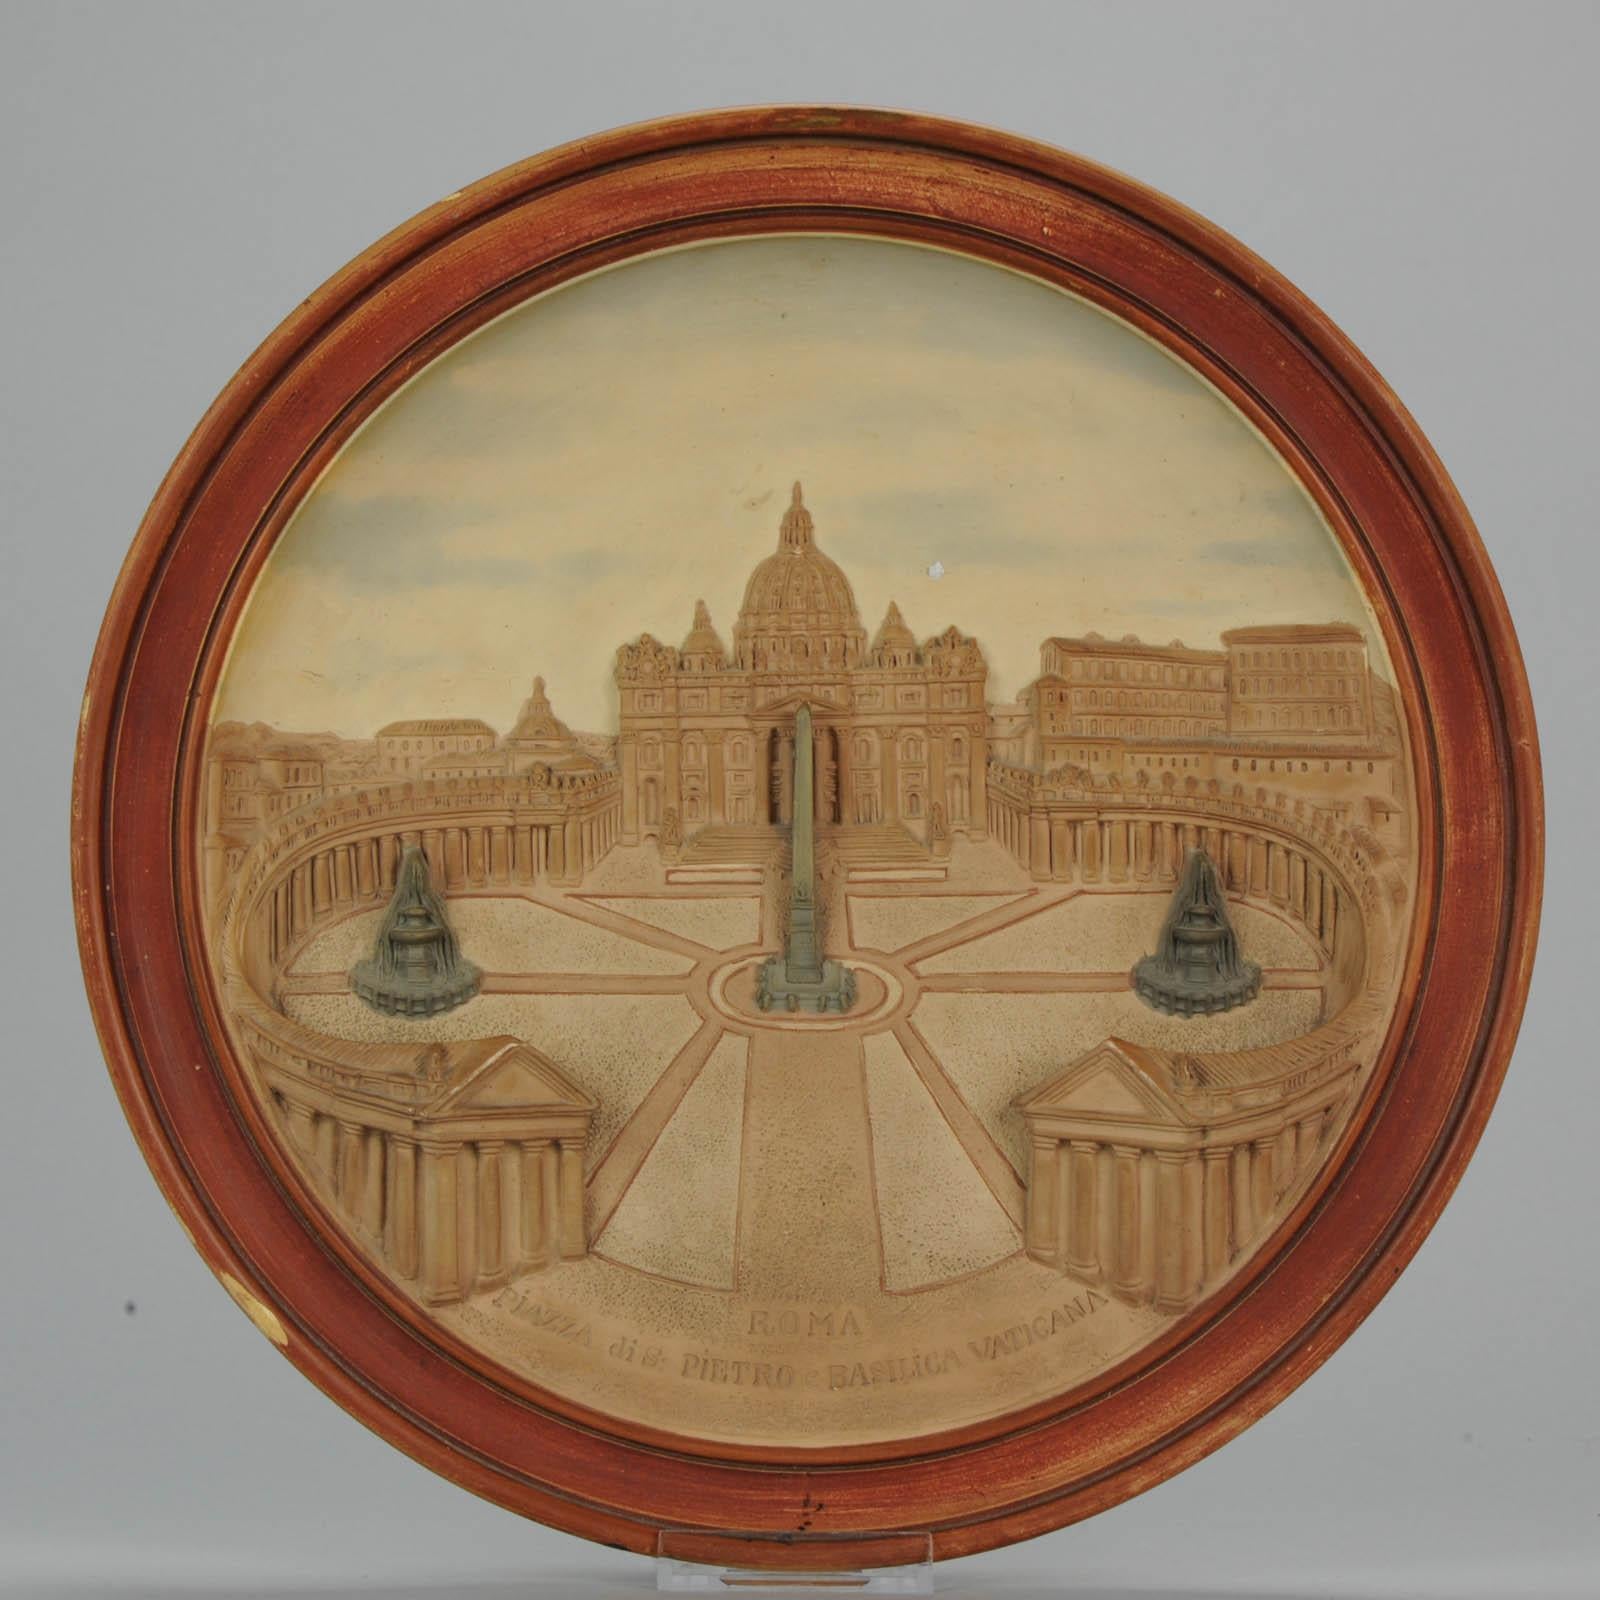 An interesting an nicely made plate. This JM emanated from a town called Aussig on the banks of the river Elbe in 1841 in a place that was then Eastern Bohemia, later becoming part of Germany. The town is now called Ústí nad Labemunstarred being